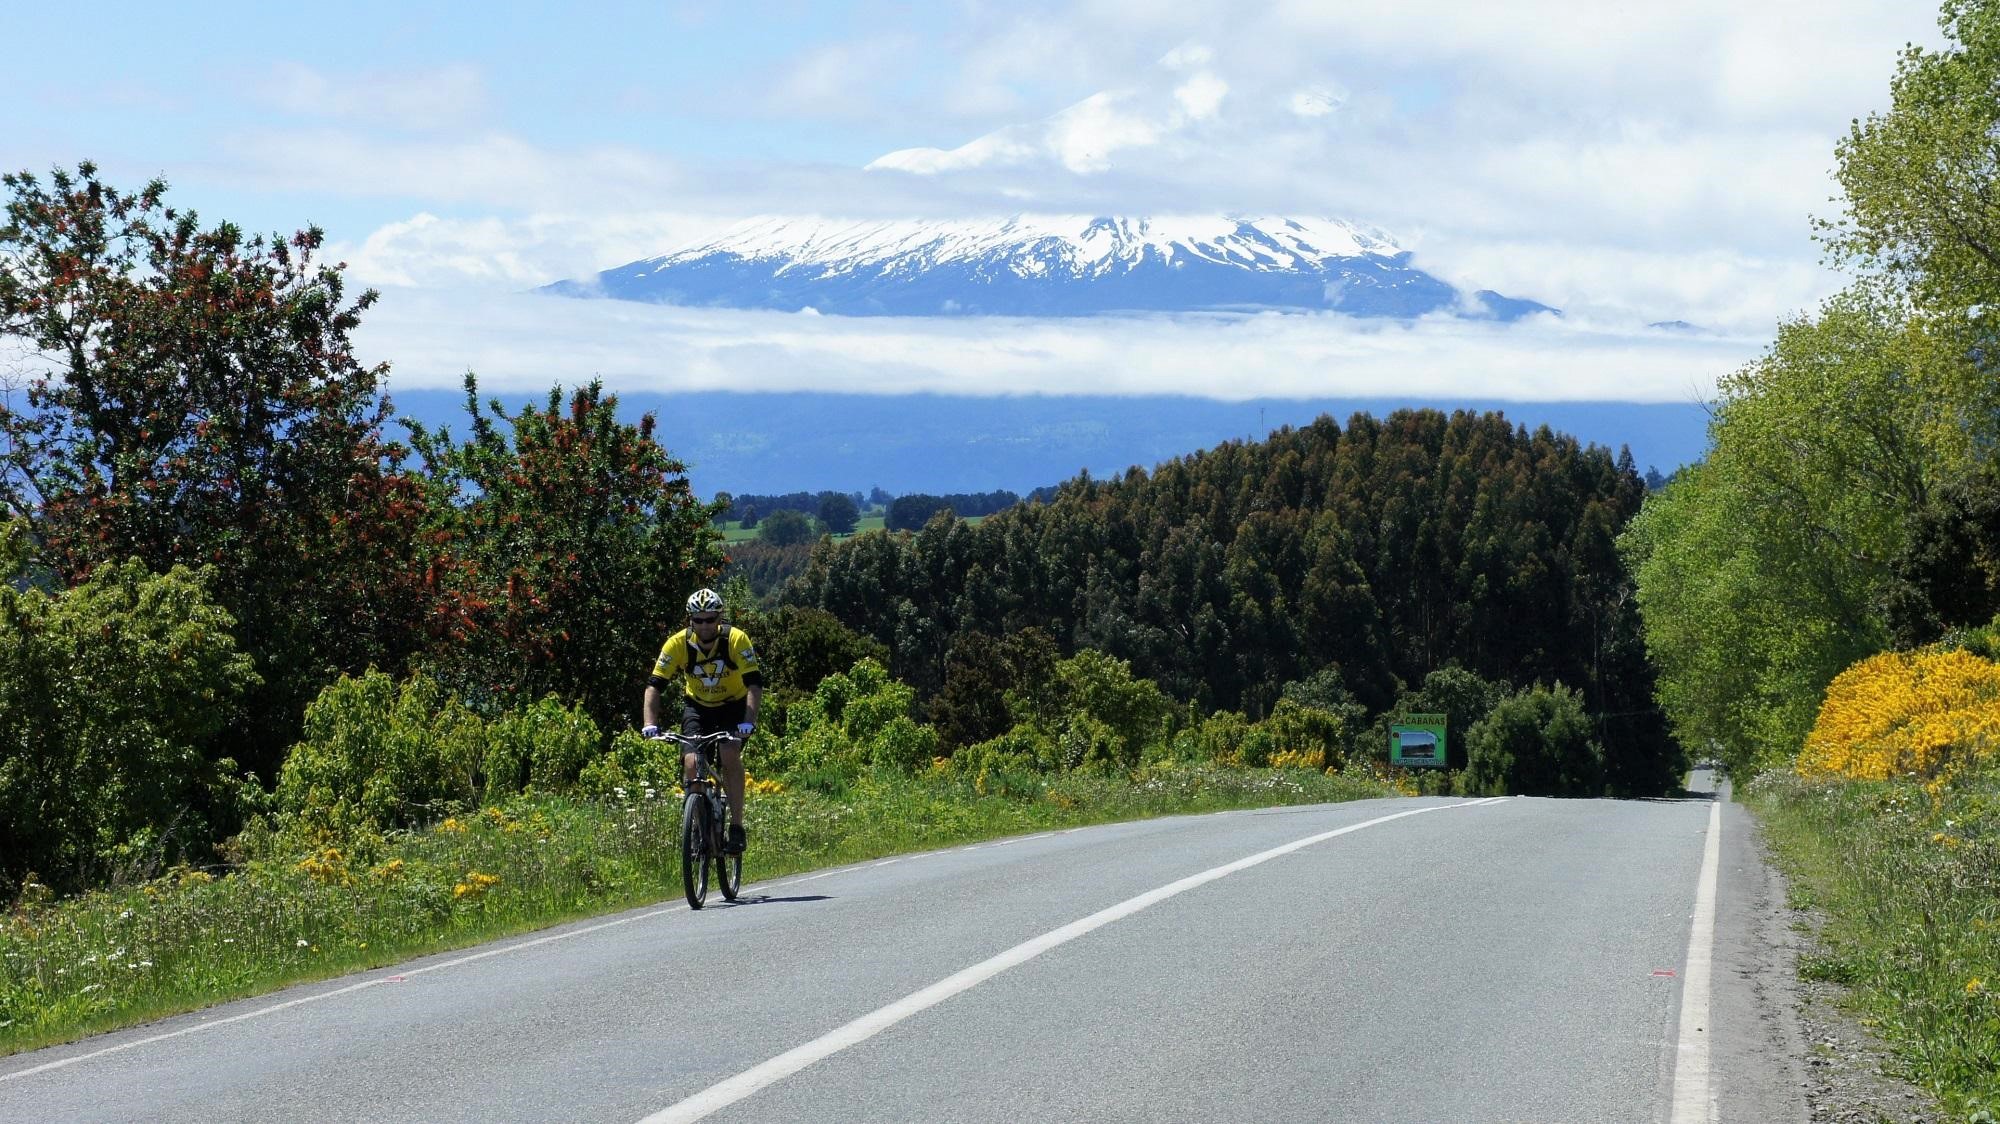 Photos from our Chile & Argentina Cycling Holiday